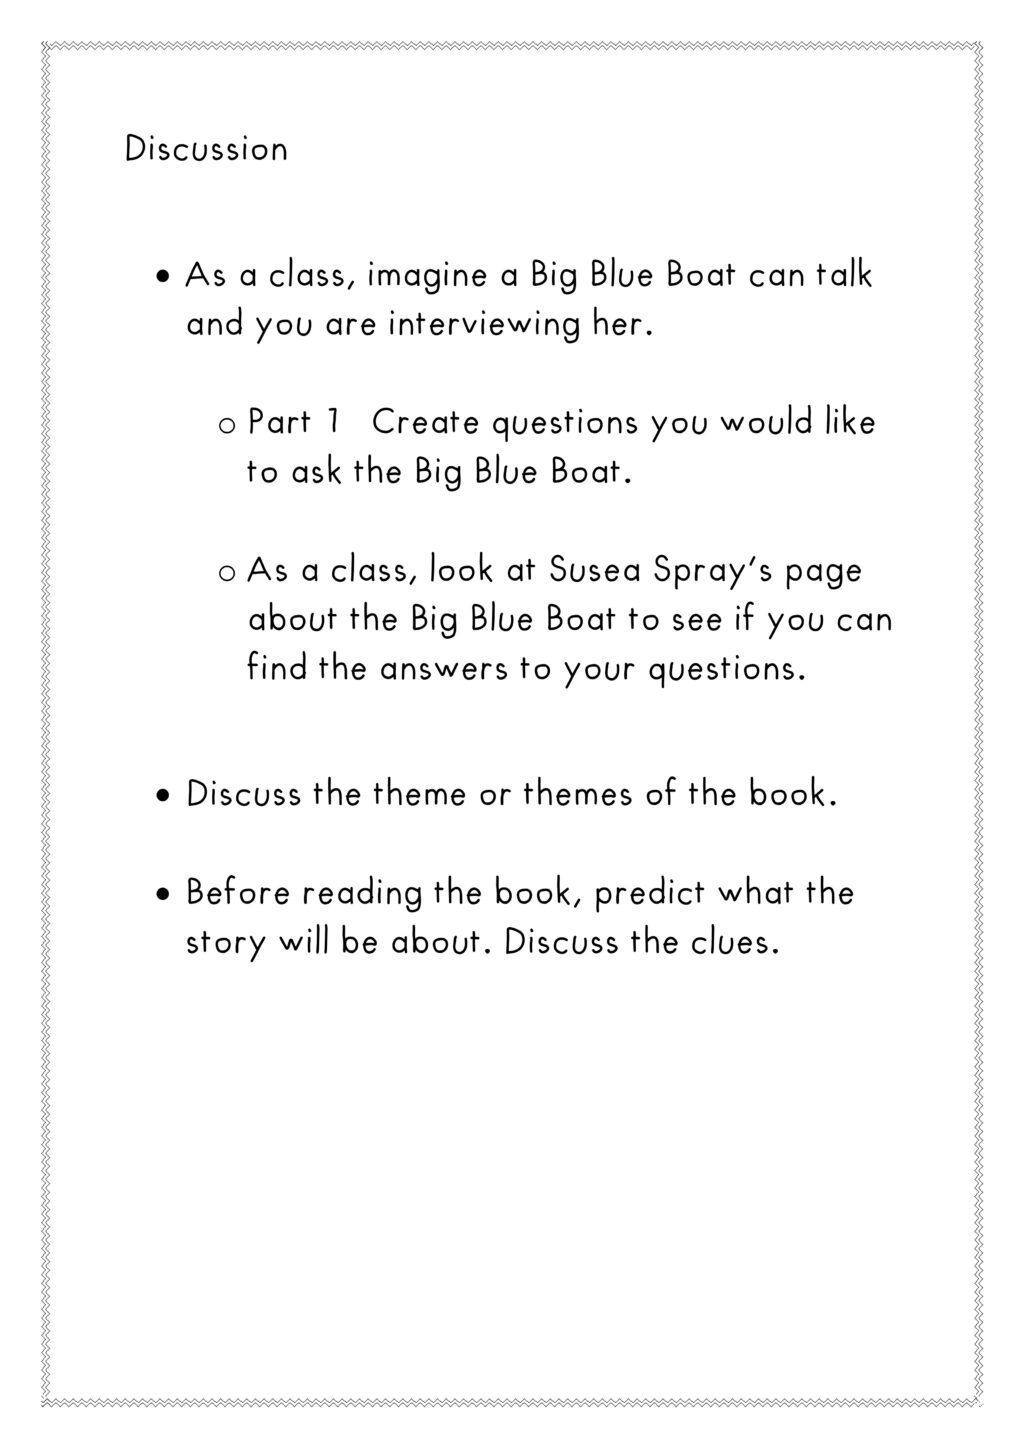 Literacy K-1 Pack reading, writing, phoncs and spelling activities for teachers The 322 page A Big Blue Boat Literacy K-1 Pack is perfect for the K-1 teacher. It’s filled with literacy activities focused on the picture book, A Big Blue Boat. literacy pack bundle 2 literacy pack bundle 1